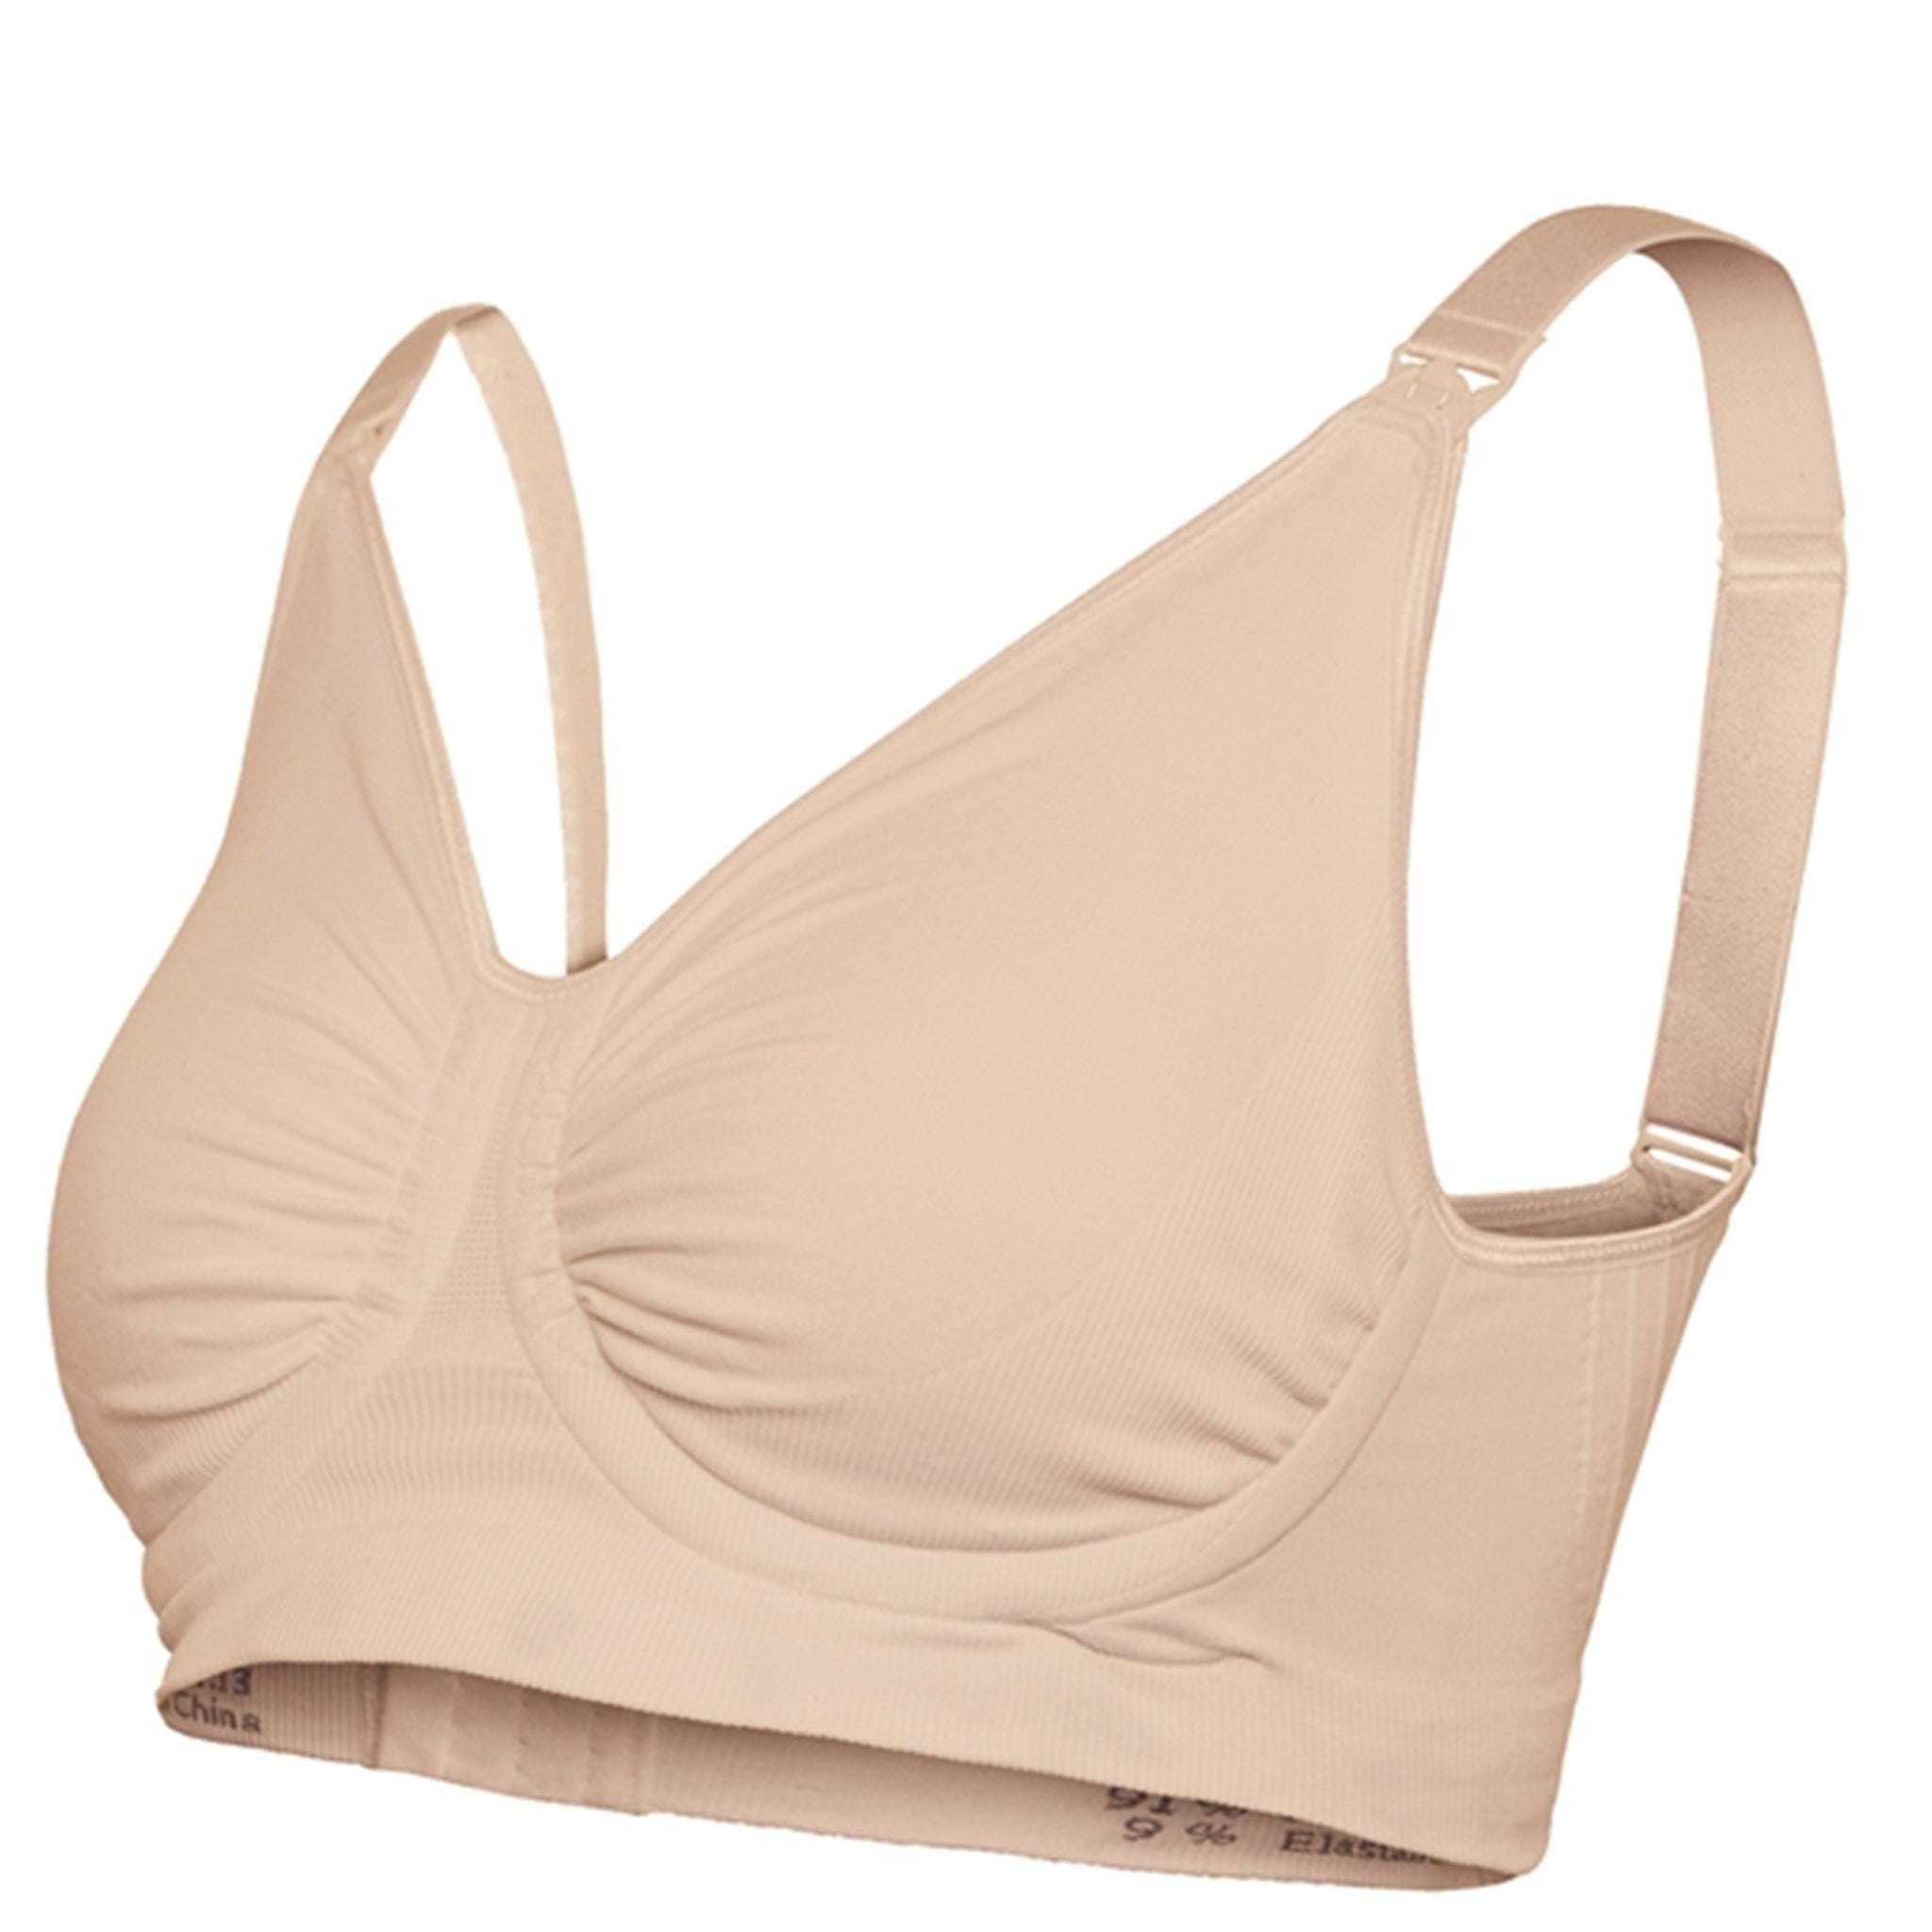 Carriwell Padded GelWire® Support Nursing Bra In White Ideal For Fuller  Breasts £12.99 - Carriwell Nursing Bras Free UK Delivery